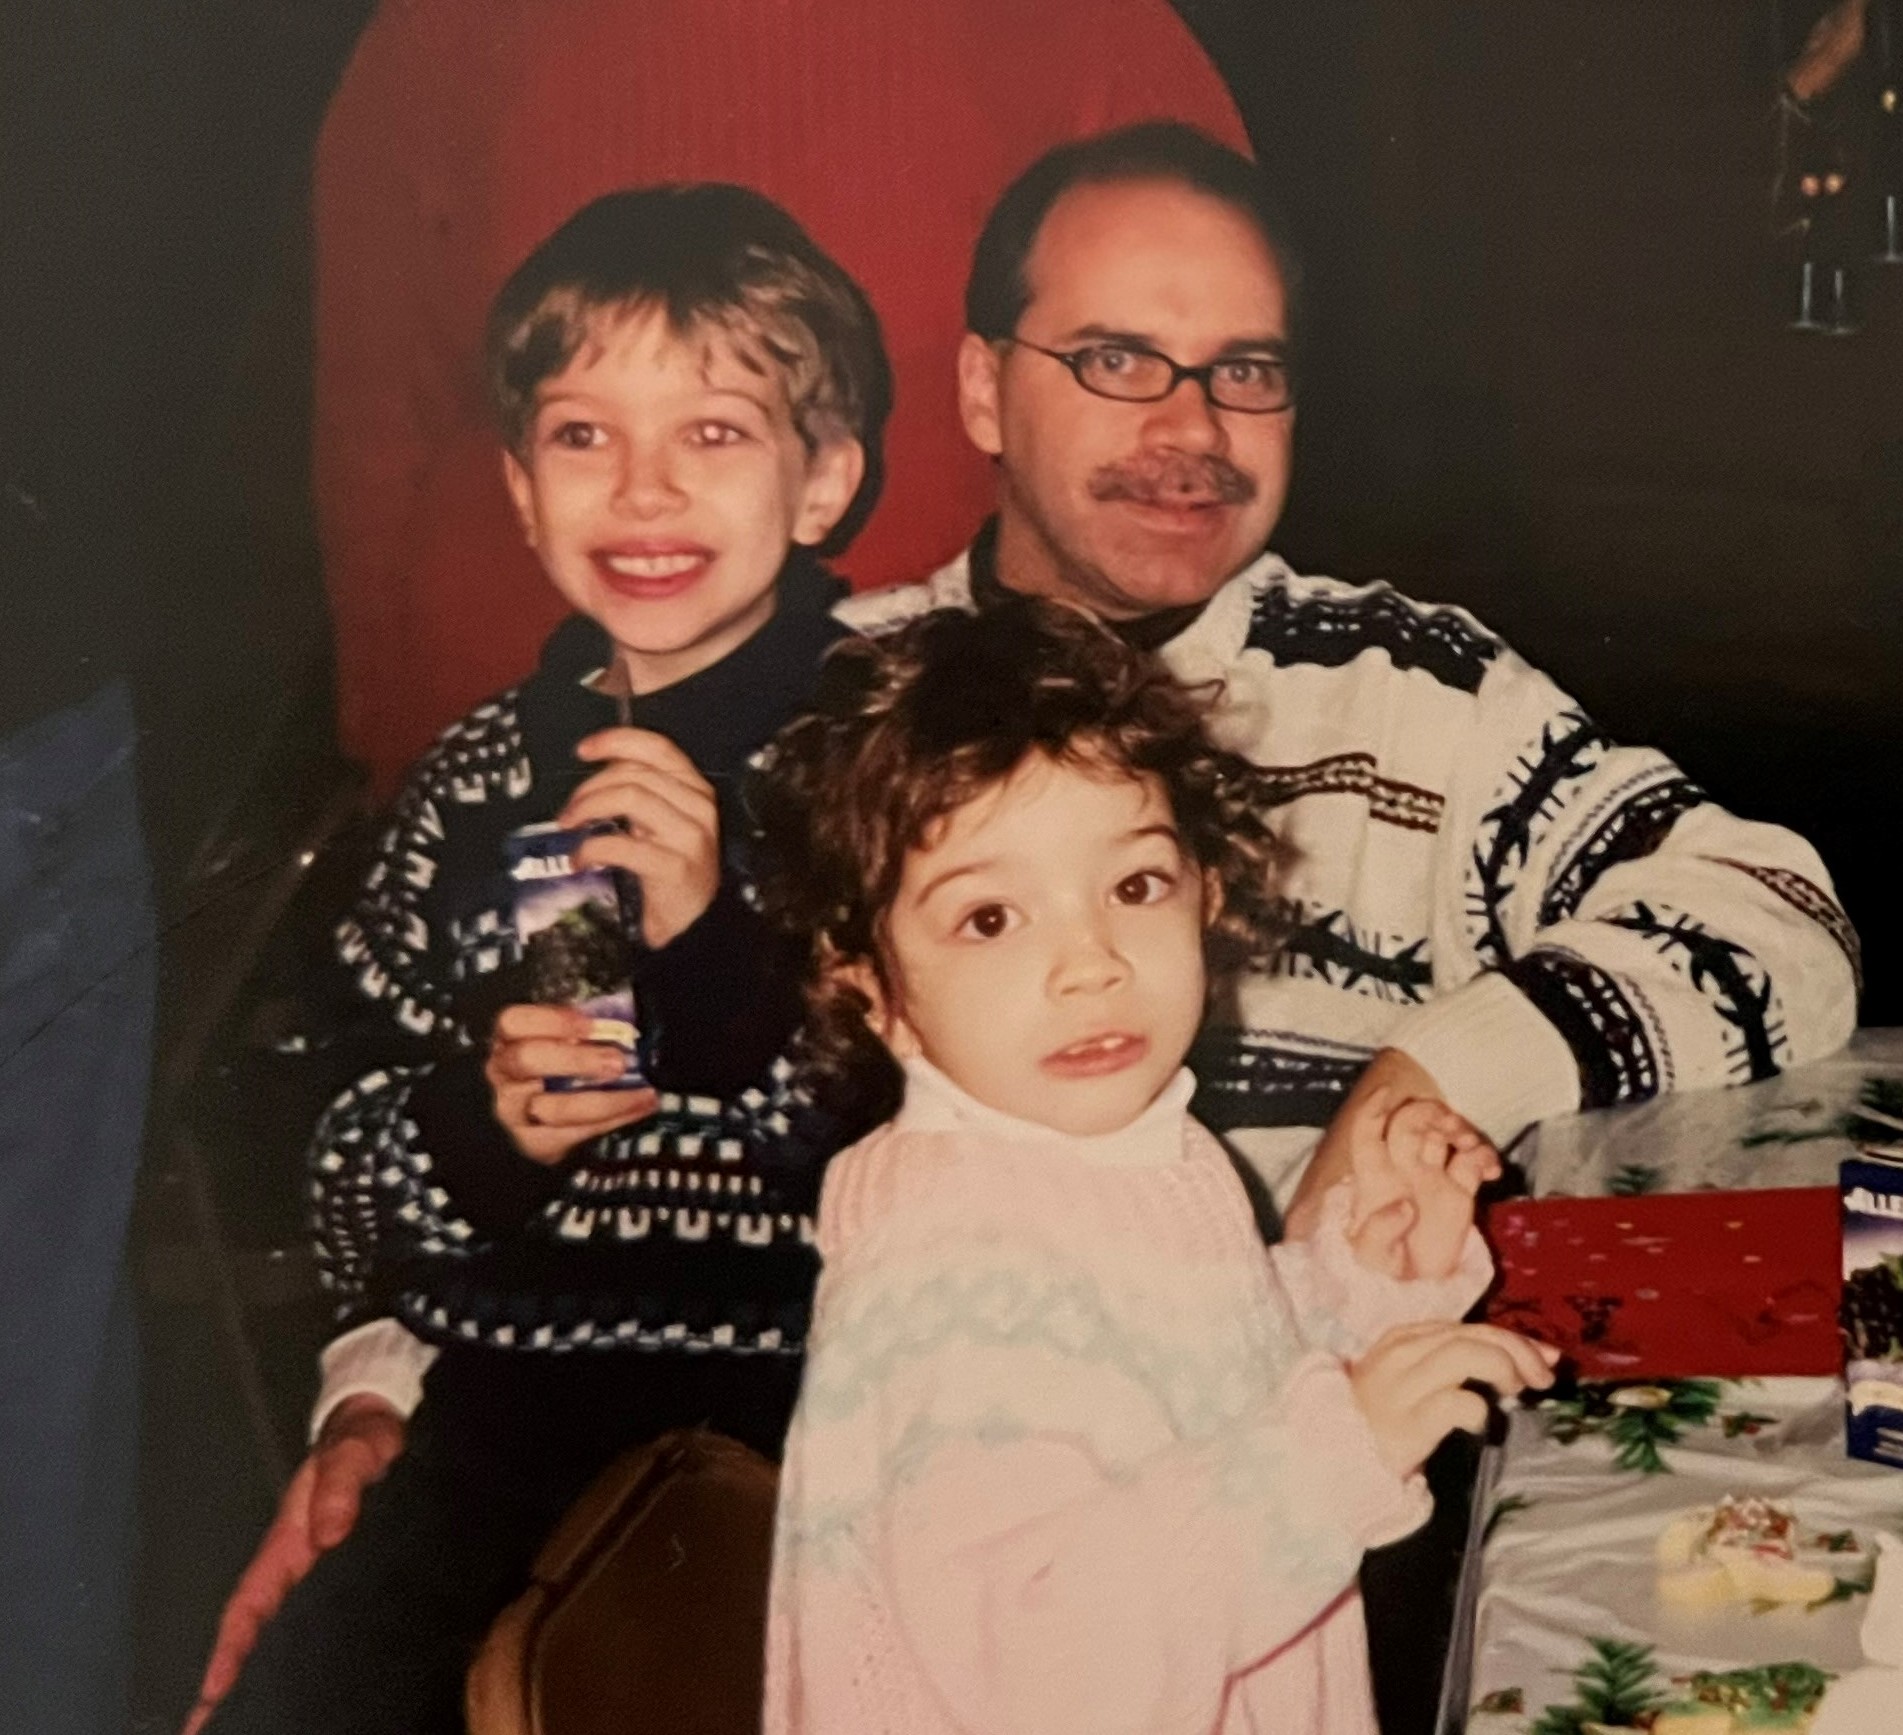 Robbins with her dad and brother, decorating cookies at a Medtronic Canada Christmas party